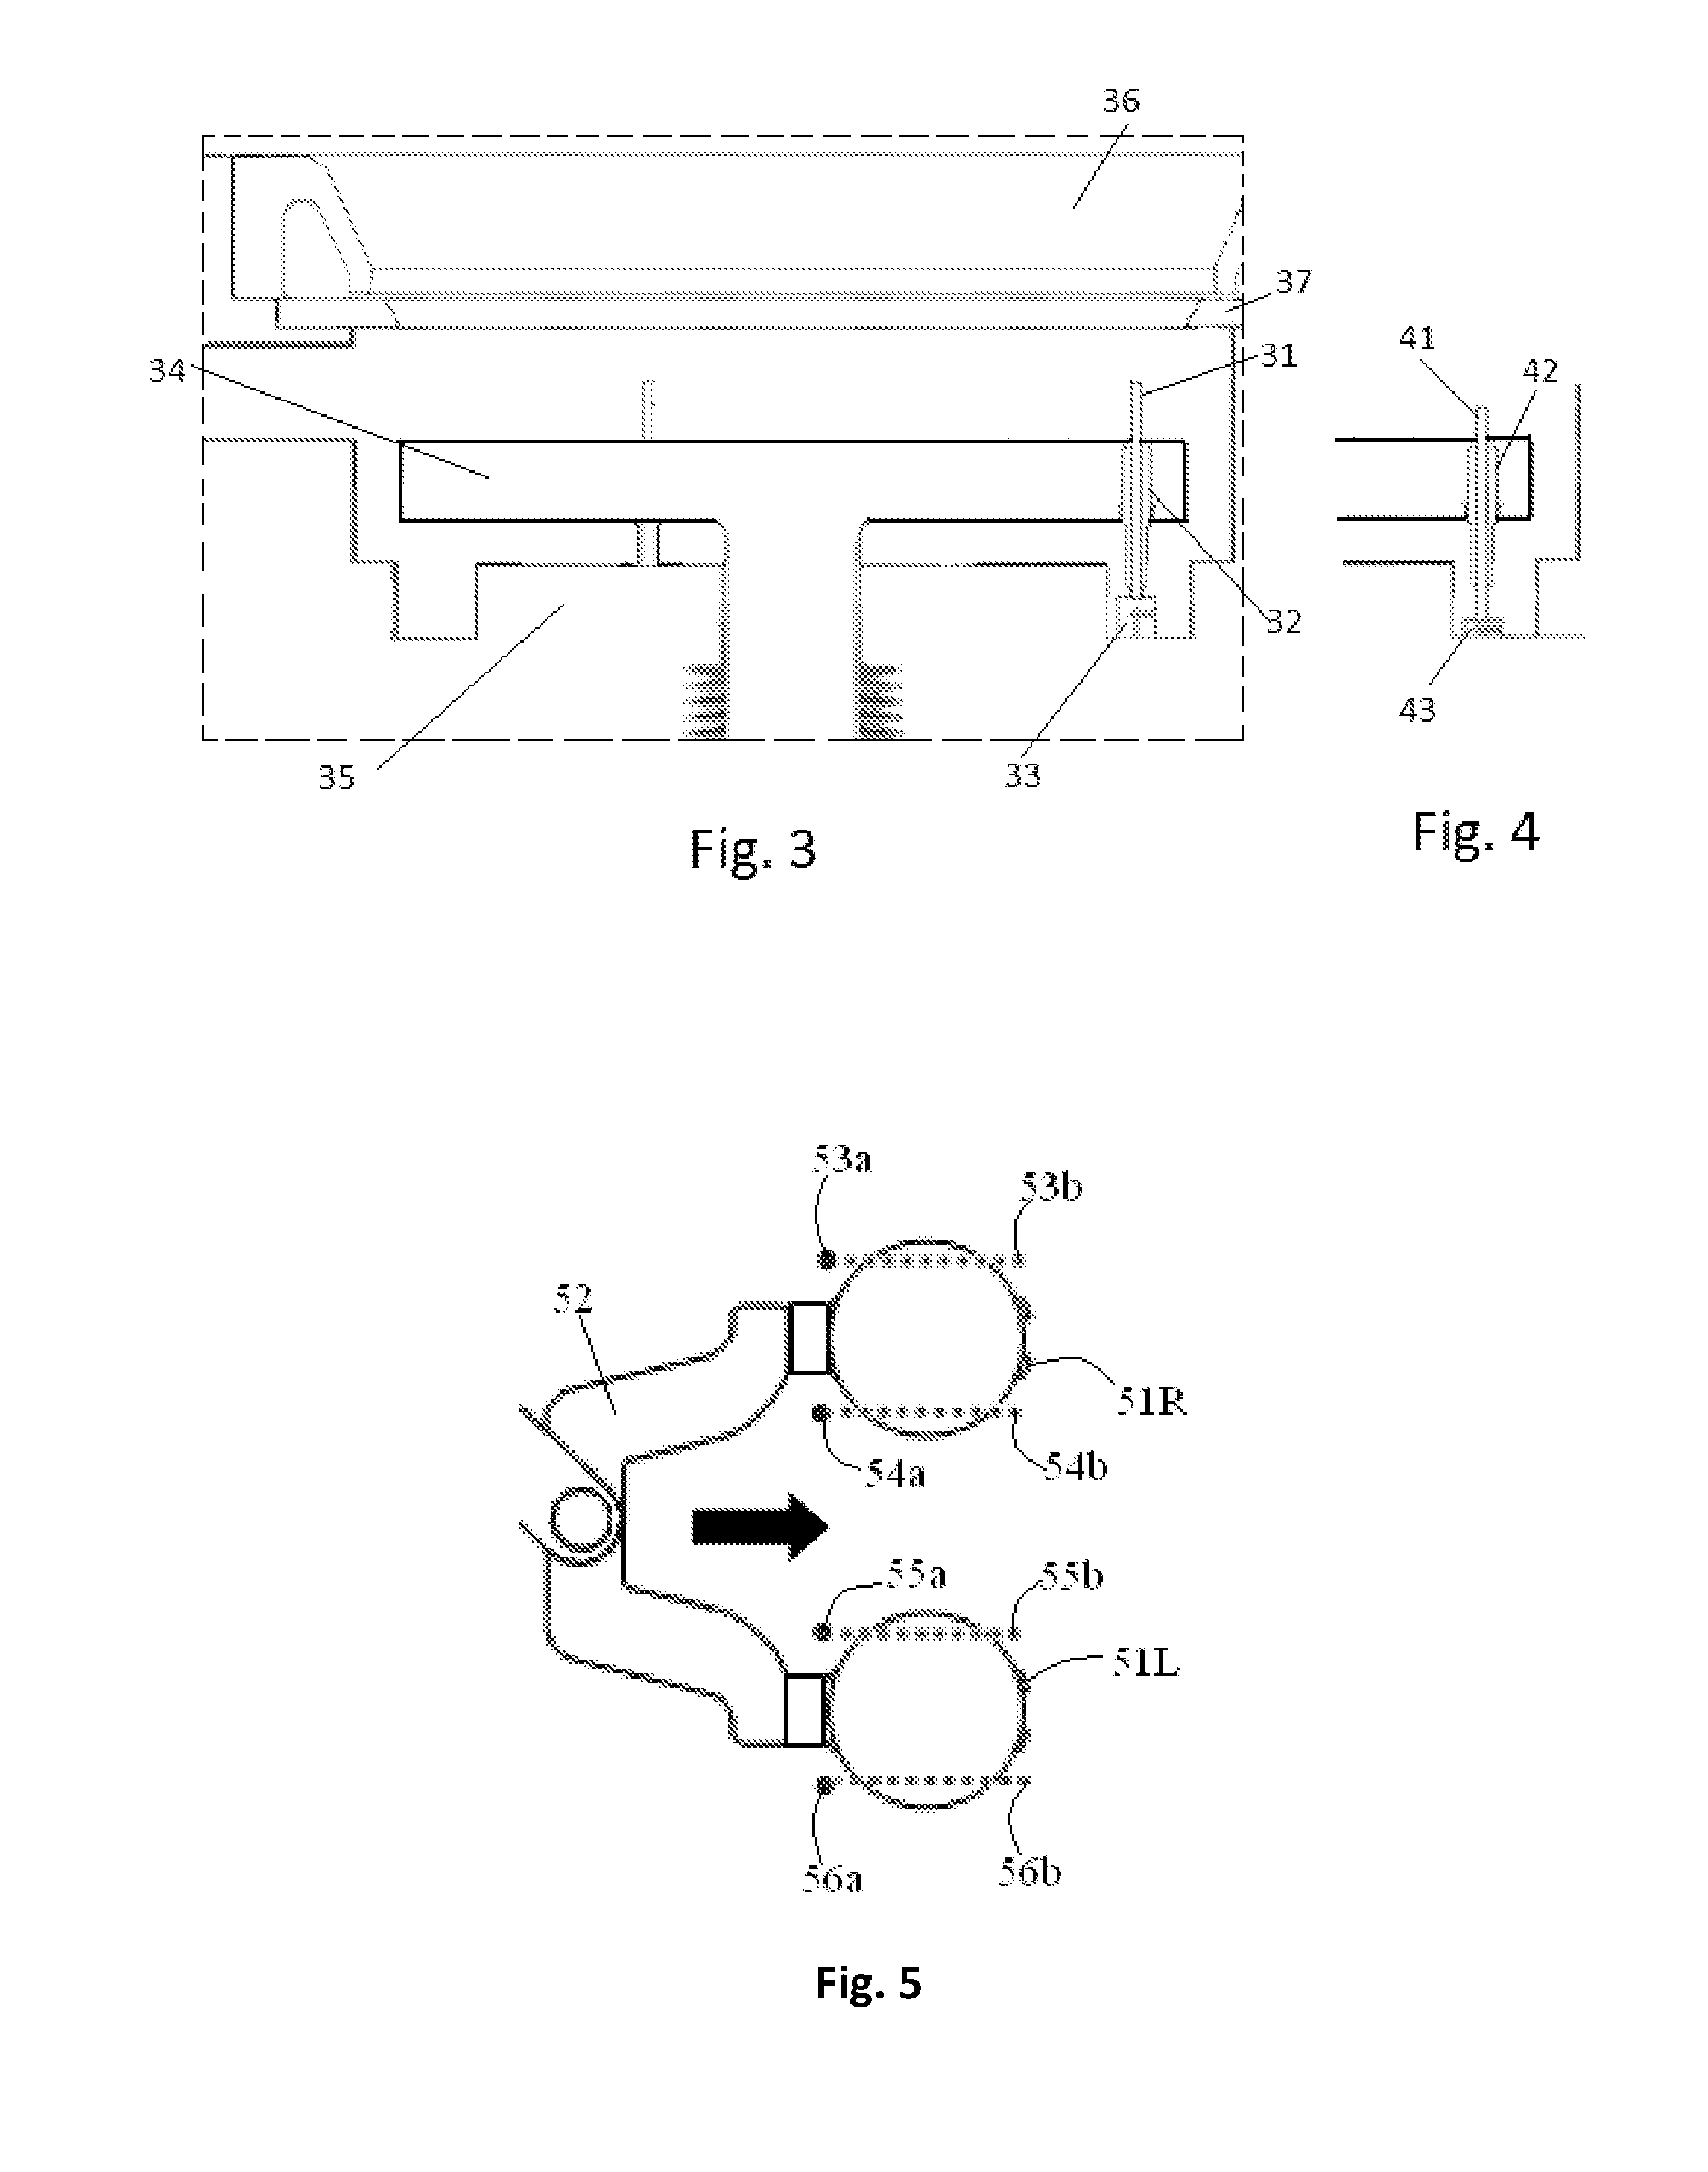 Method for Positioning Wafers in Multiple Wafer Transport